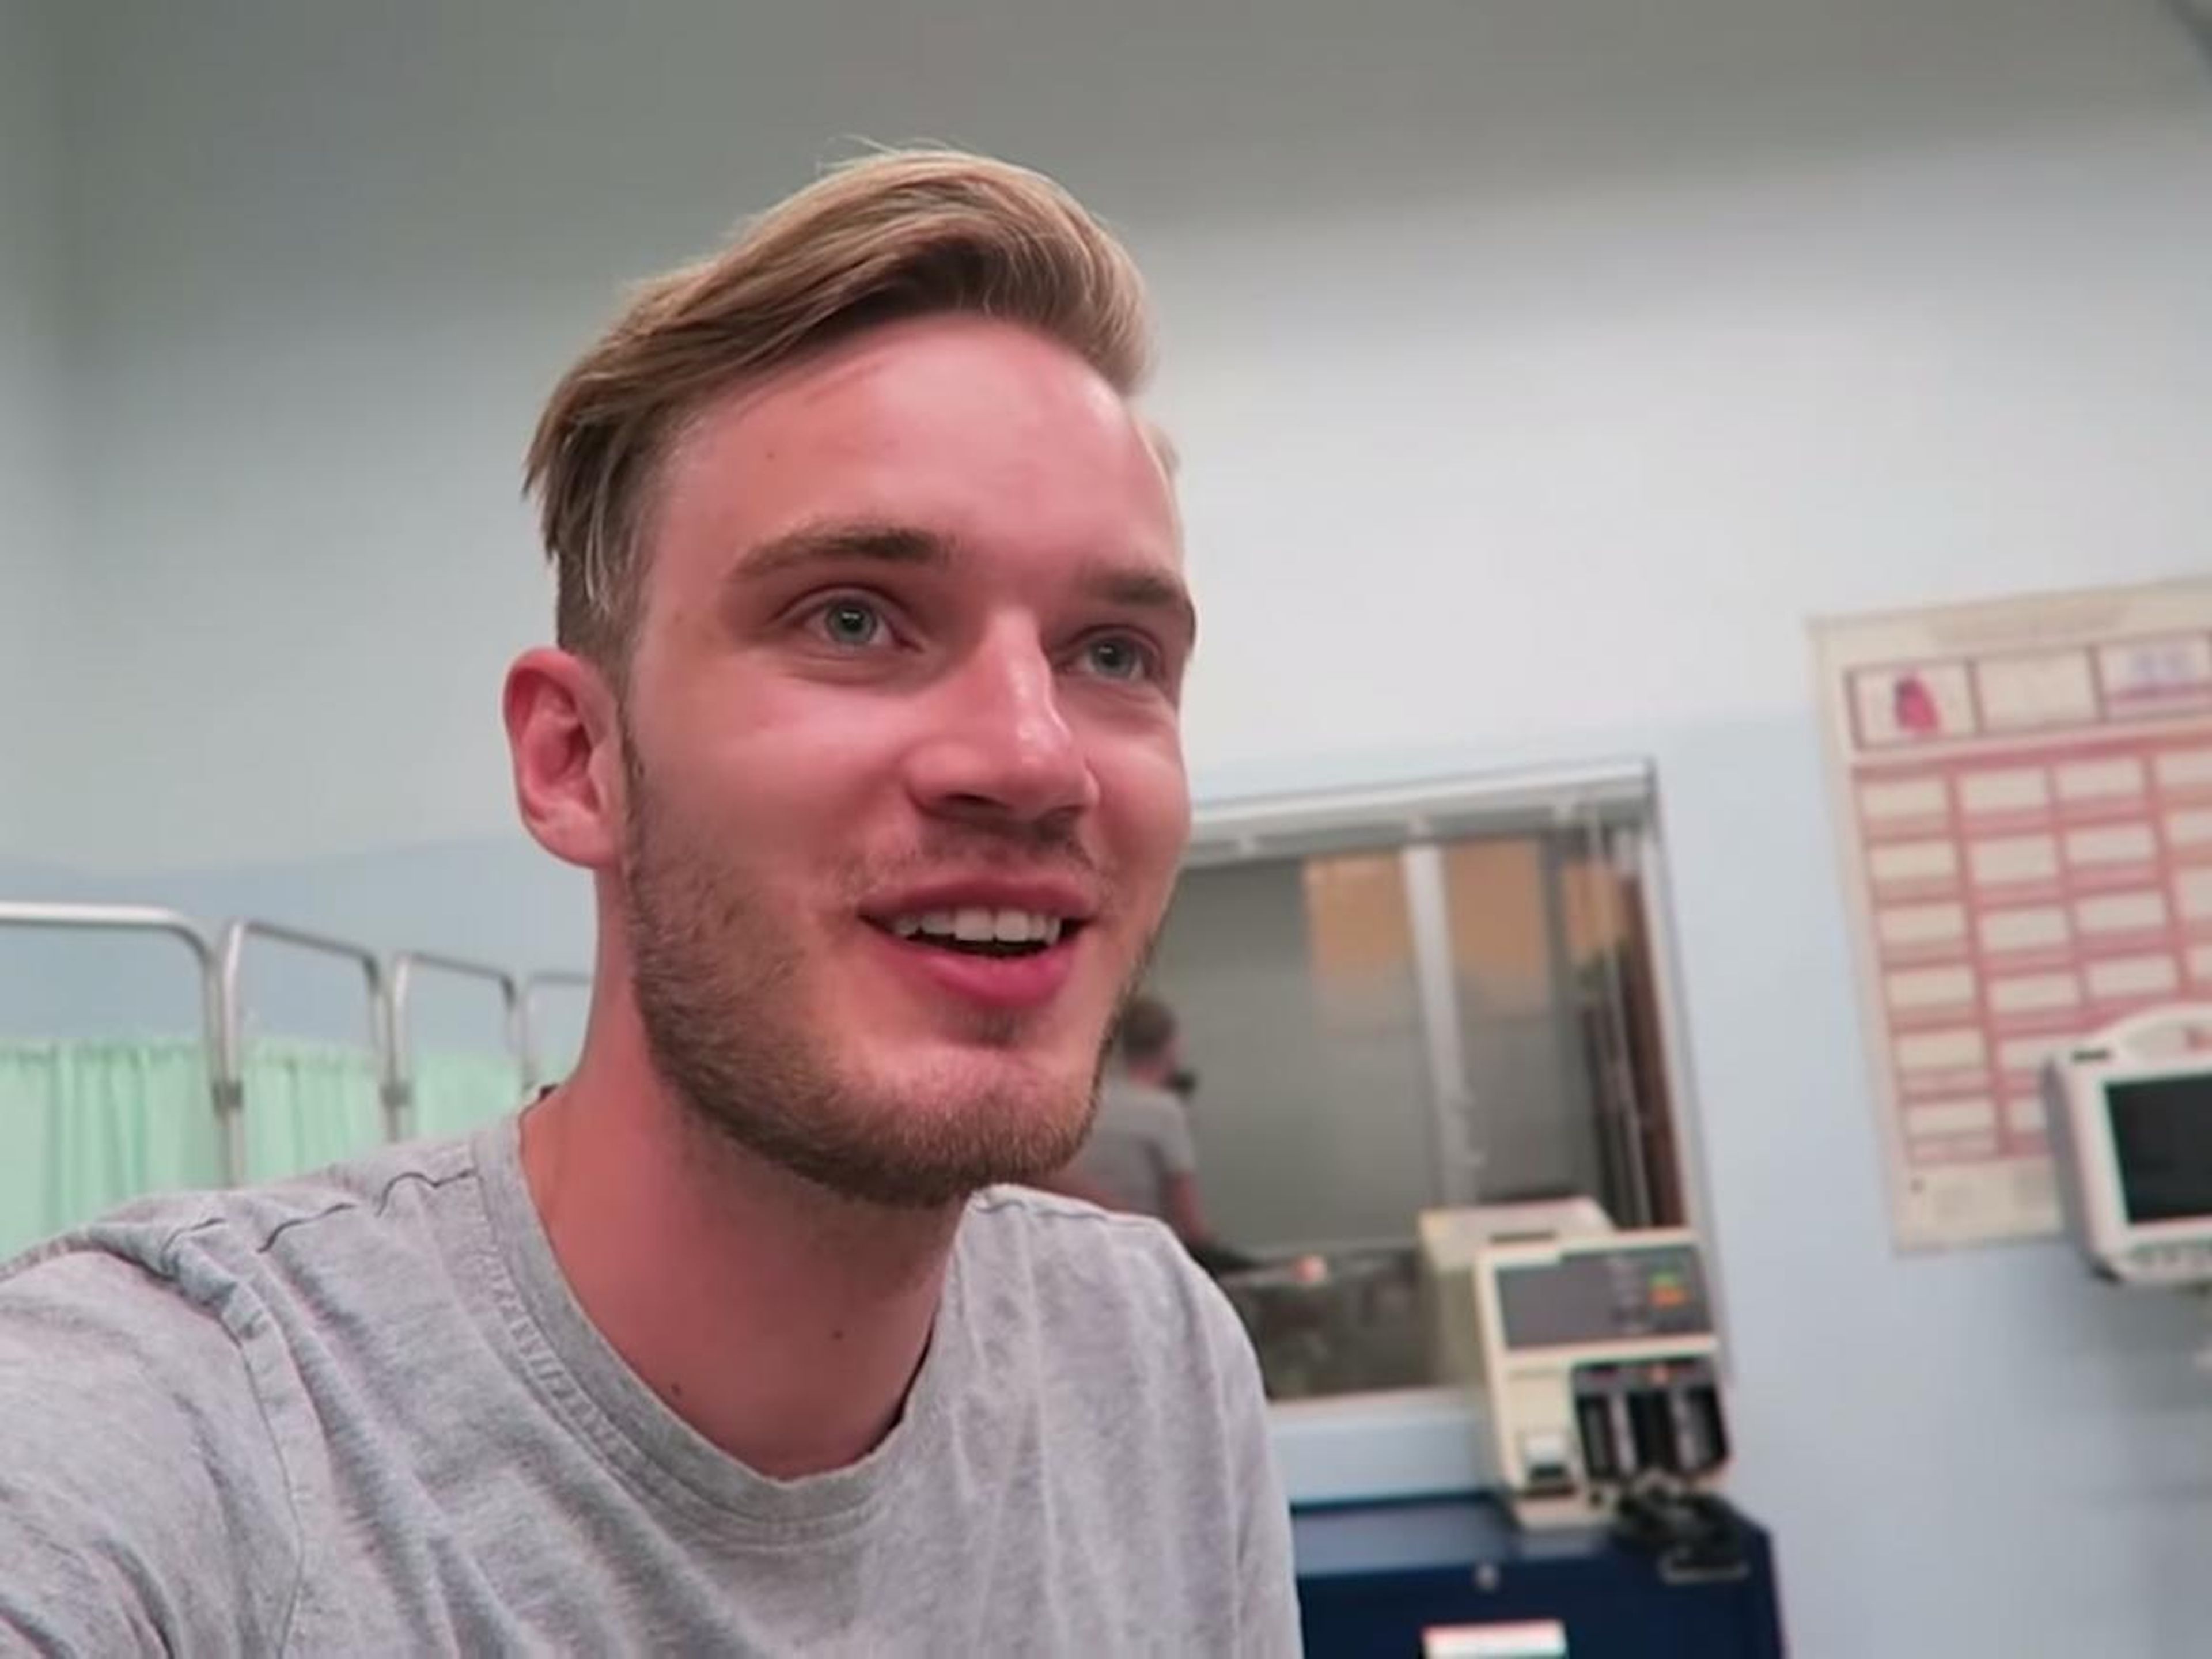 Felix Kjellberg, who goes by PewDiePie online, is one of the highest-earning YouTubers. In a recent video, he said that his net worth is "definitely" more than $20 million.